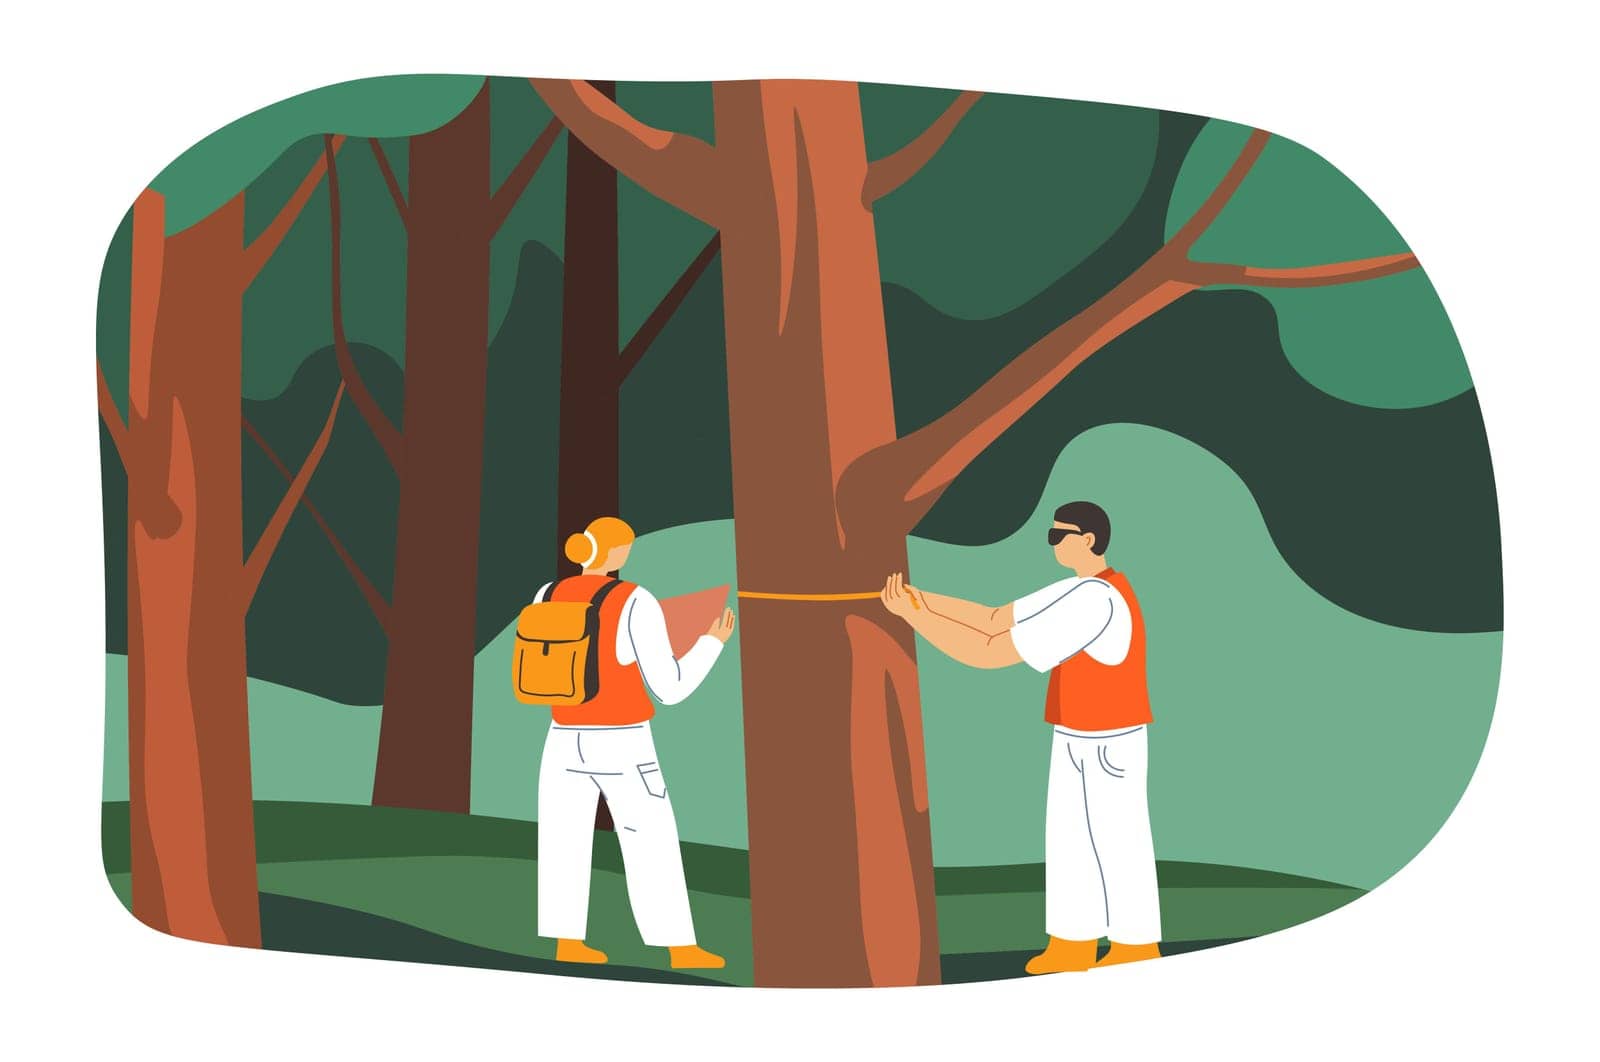 Researches and analysis of scientists measuring tree trunk in woods. Environmental problems and pollution, care for nature and biodiversity safety, ecological awareness. Vector in flat style